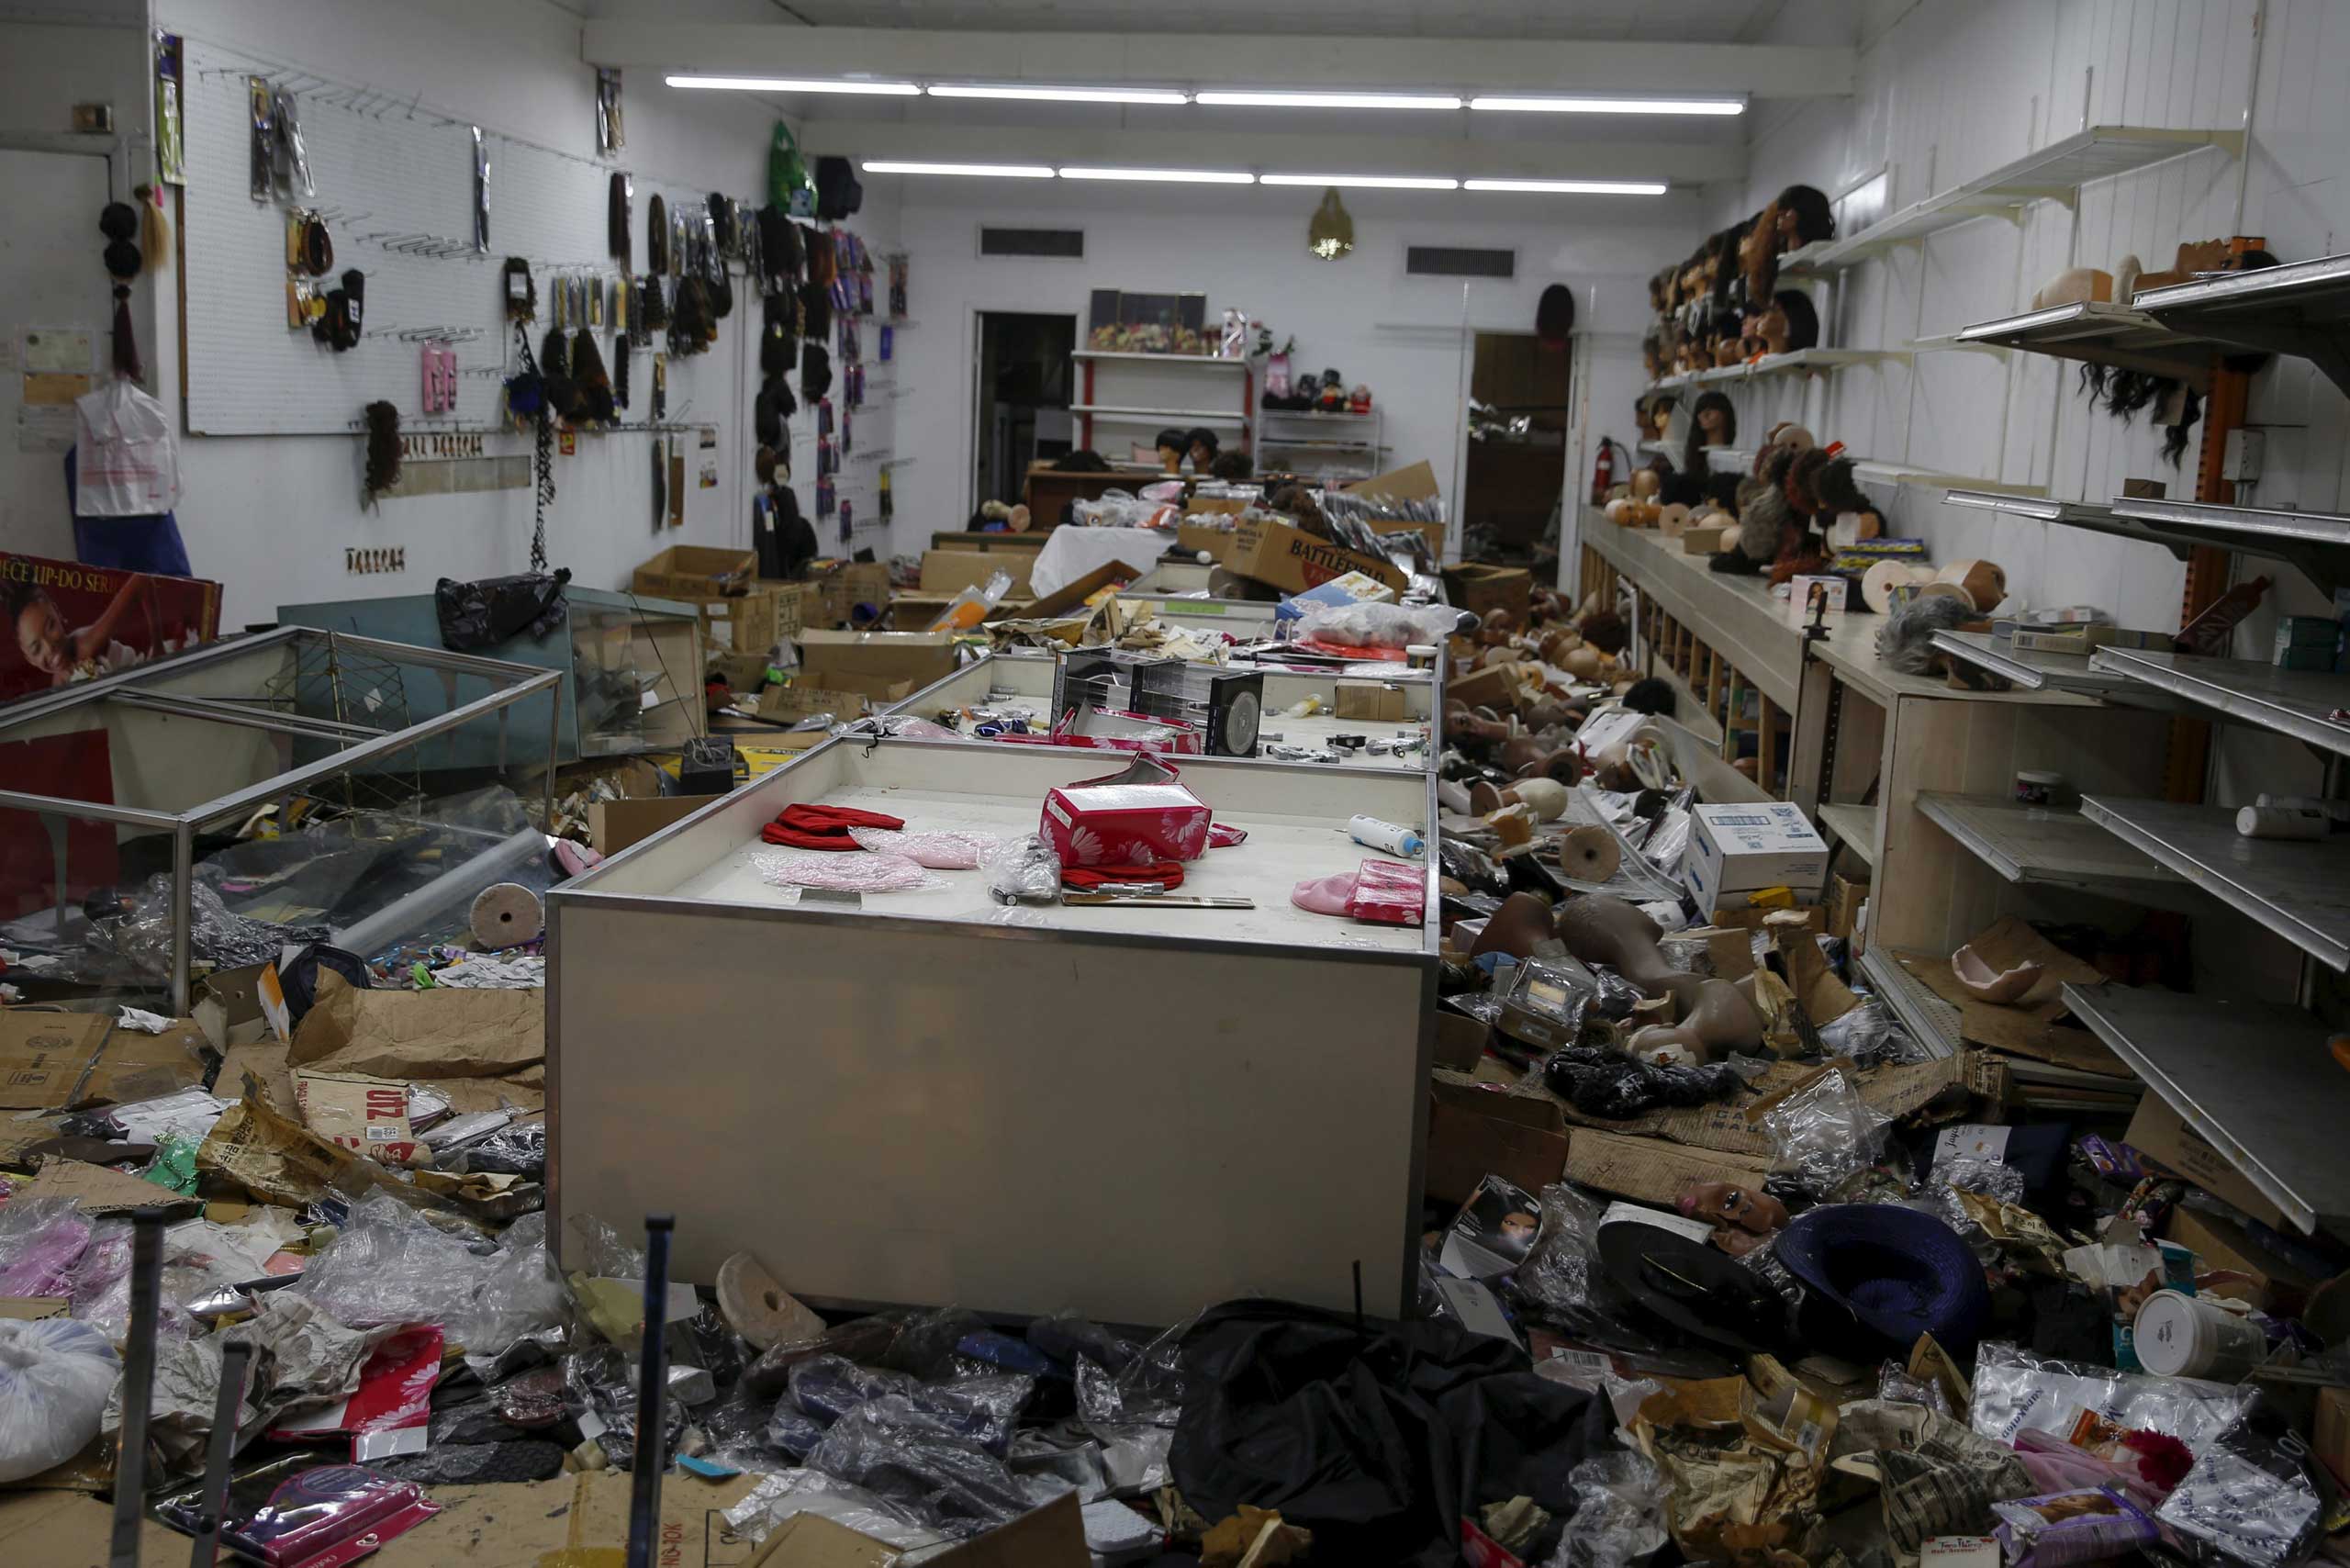 A looted wig shop is seen damaged after a night of riots in Baltimore on April 28, 2015.